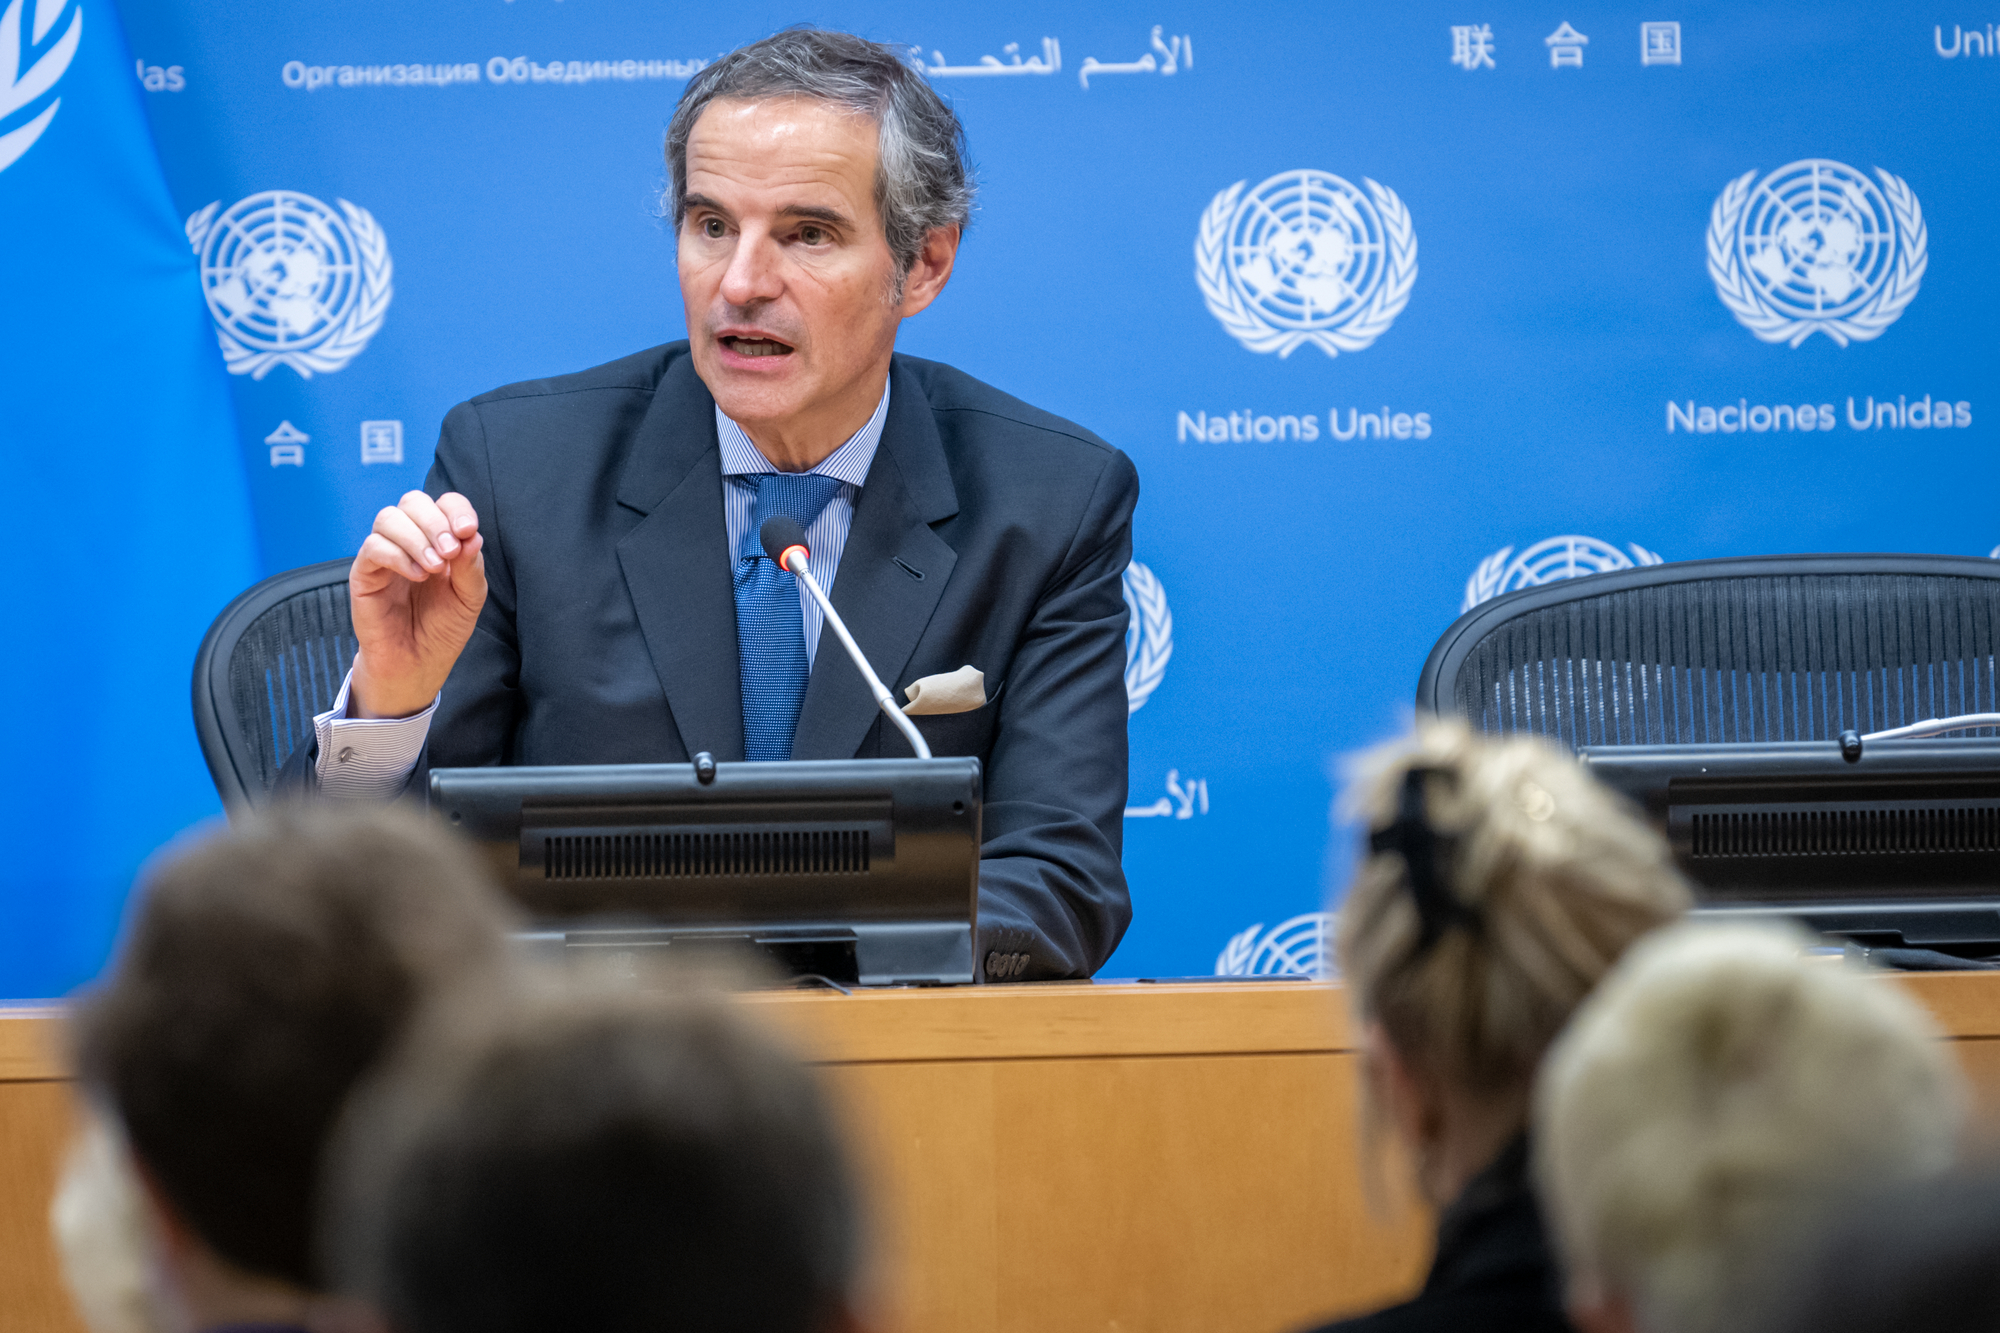 Rafael Mariano Grossi, Director General of the International Atomic Energy Agency (IAEA), briefs reporters on the Tenth Review Conference of the Parties to the Treaty on the Non-Proliferation of Nuclear Weapons.